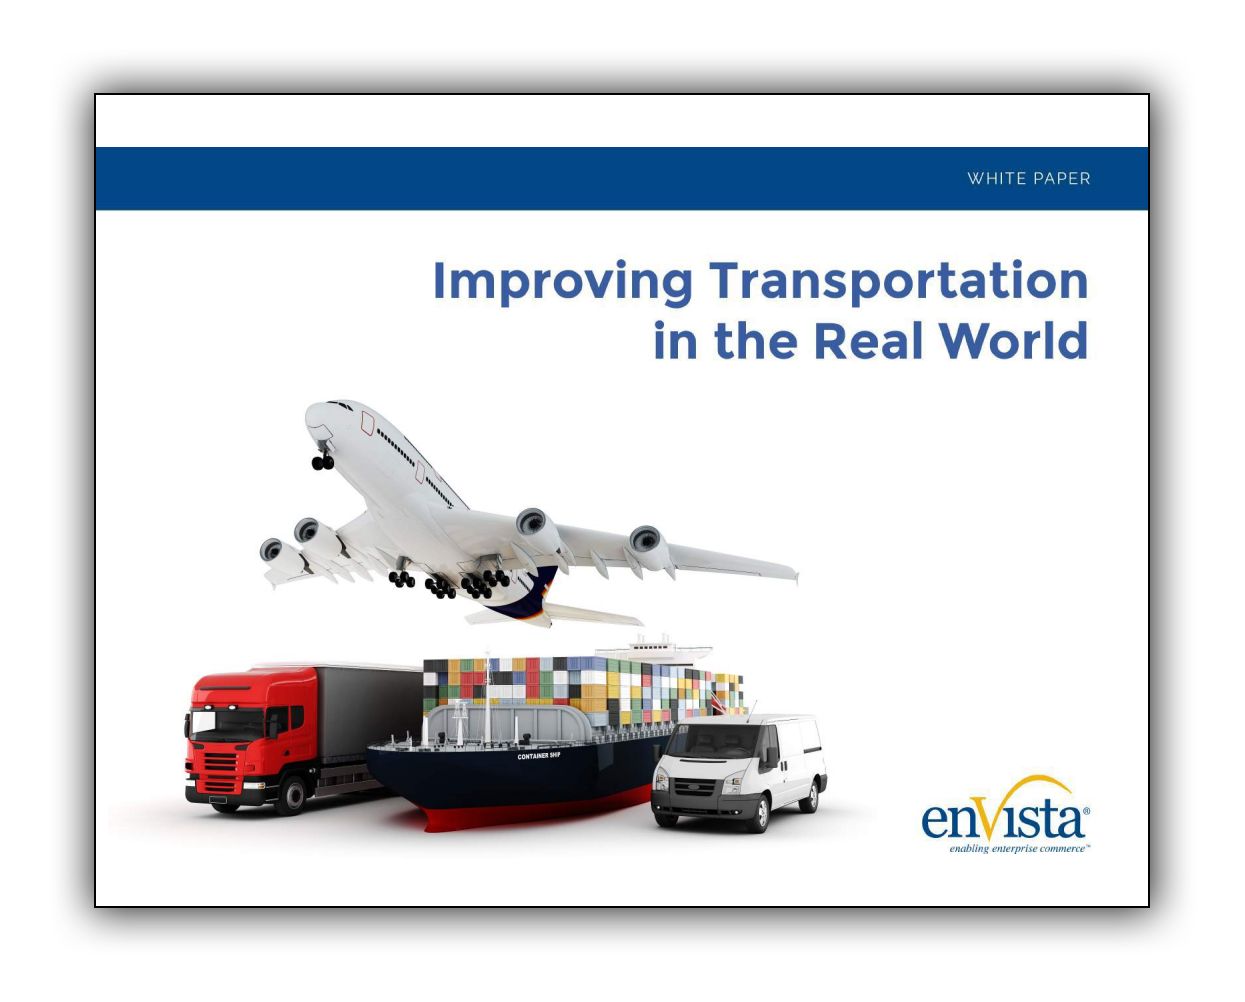 Image_Improving-Transportation-in-the-real-world.png